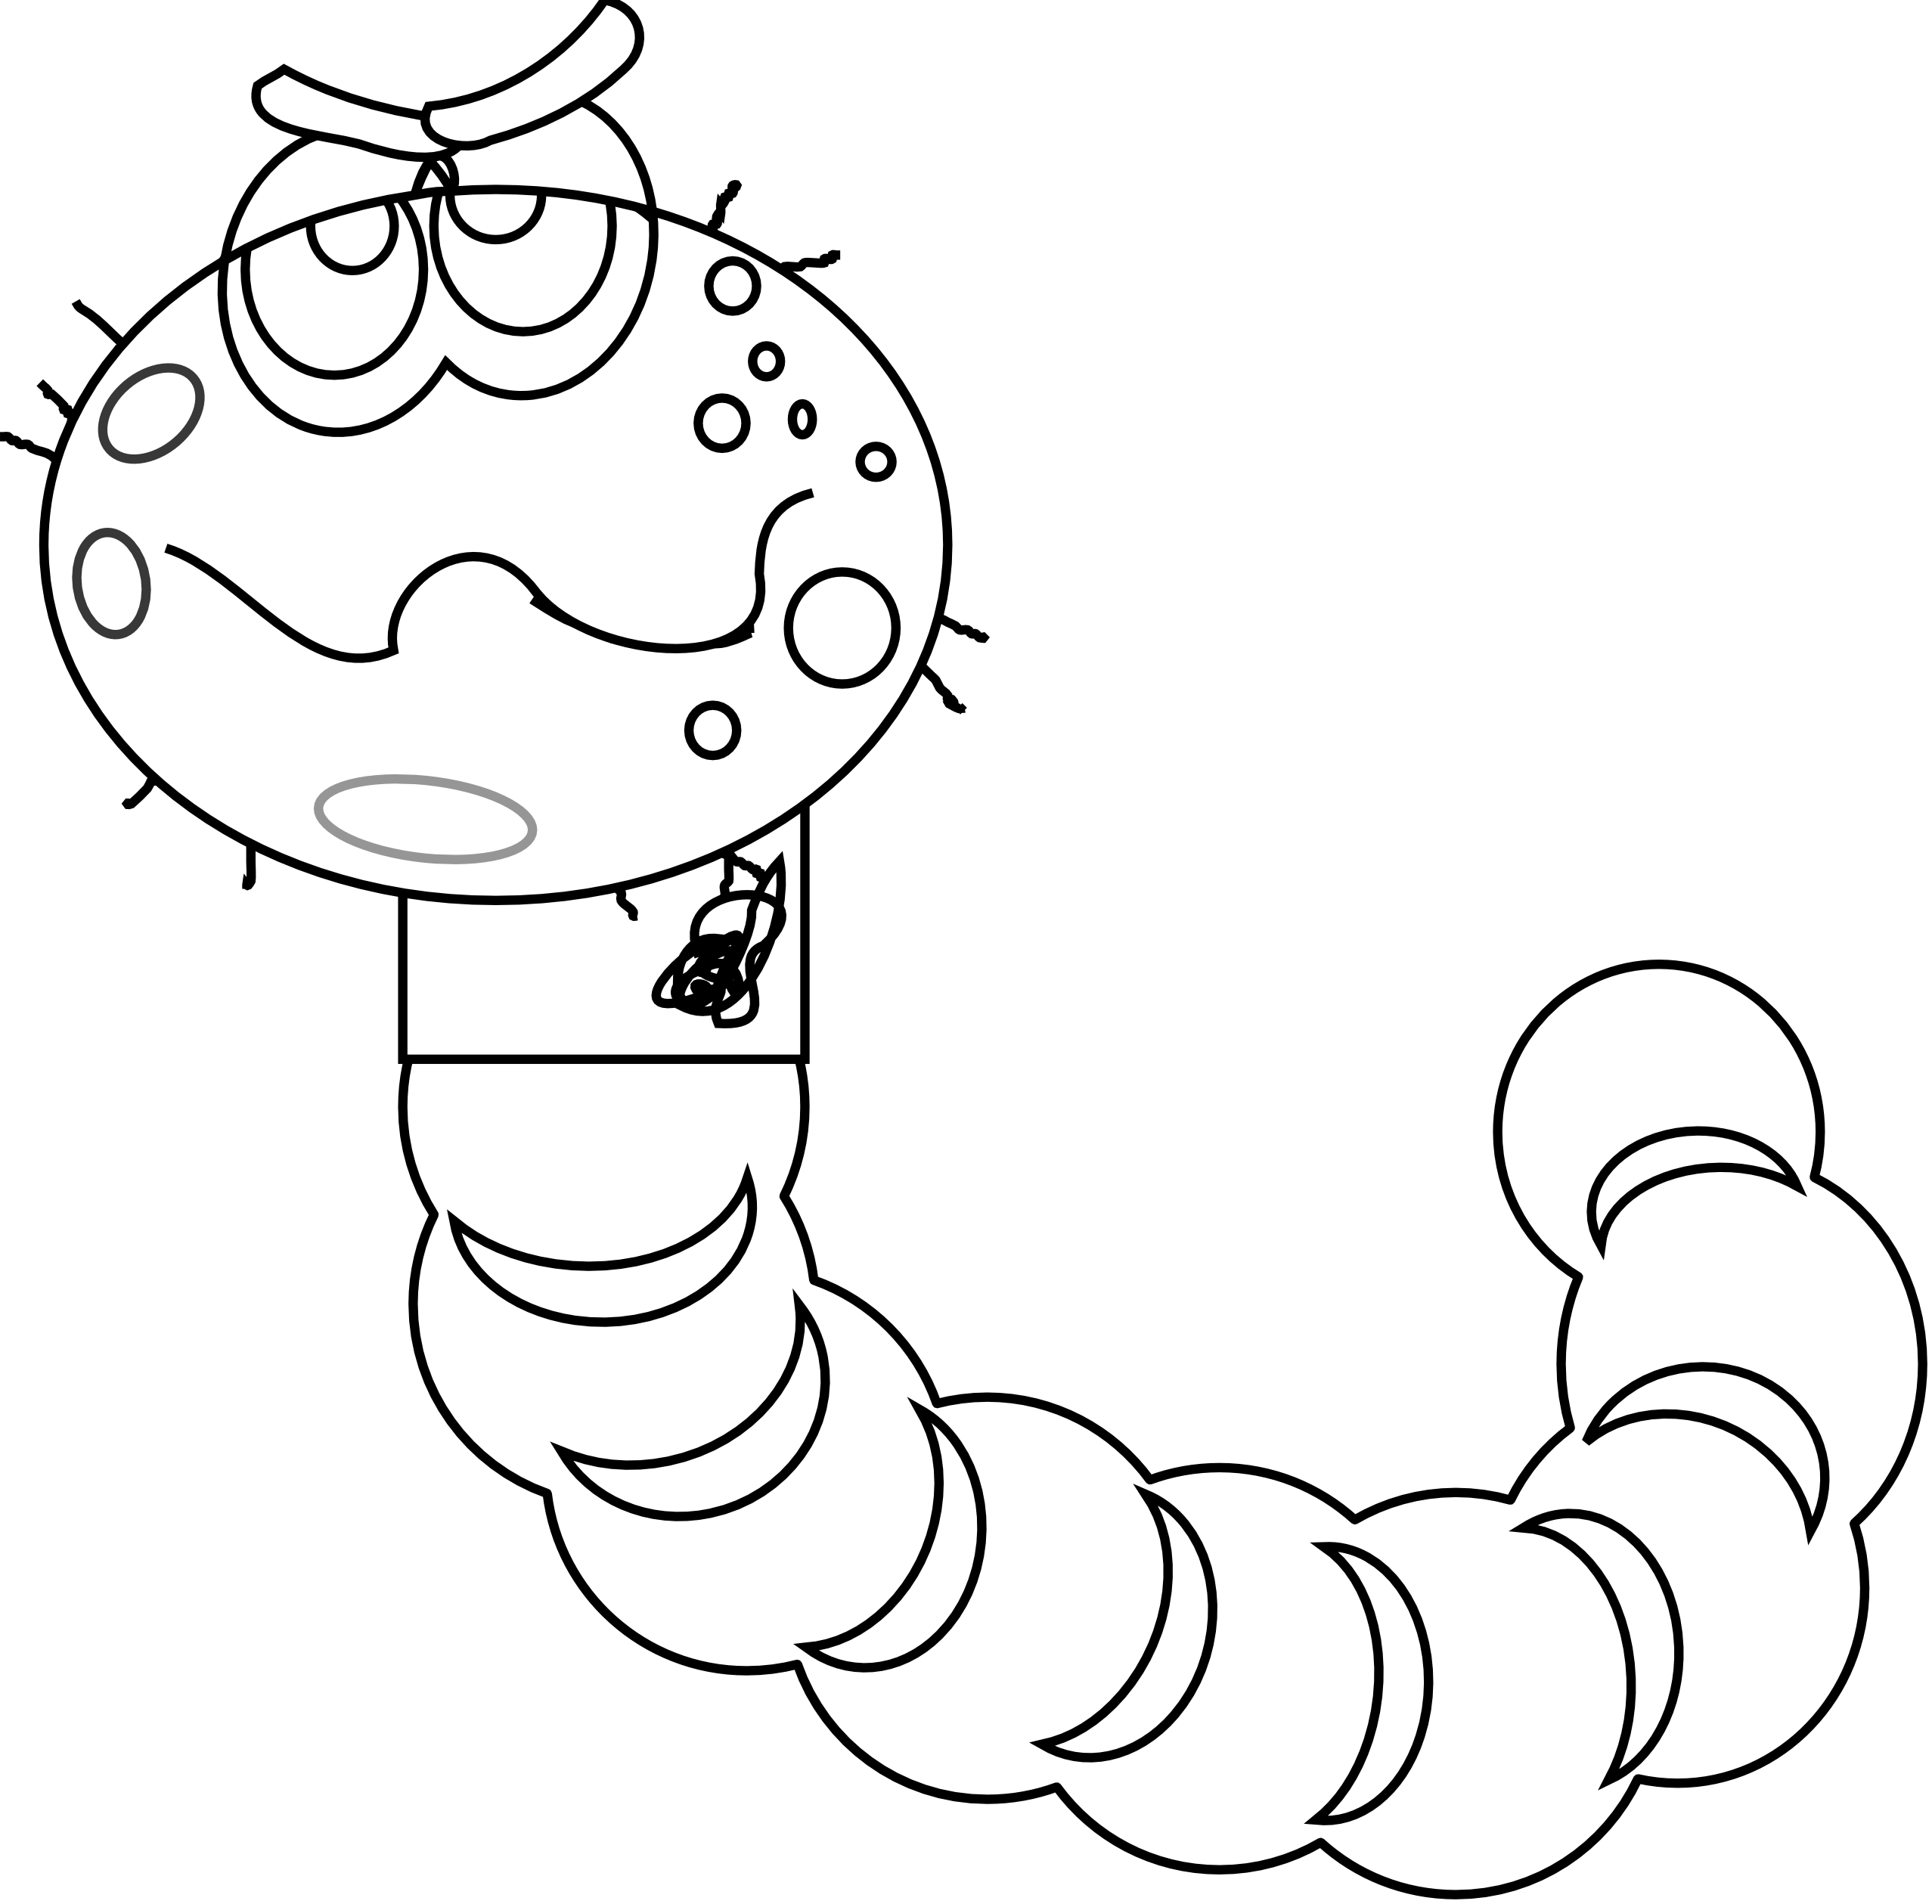 Worm svg #2, Download drawings